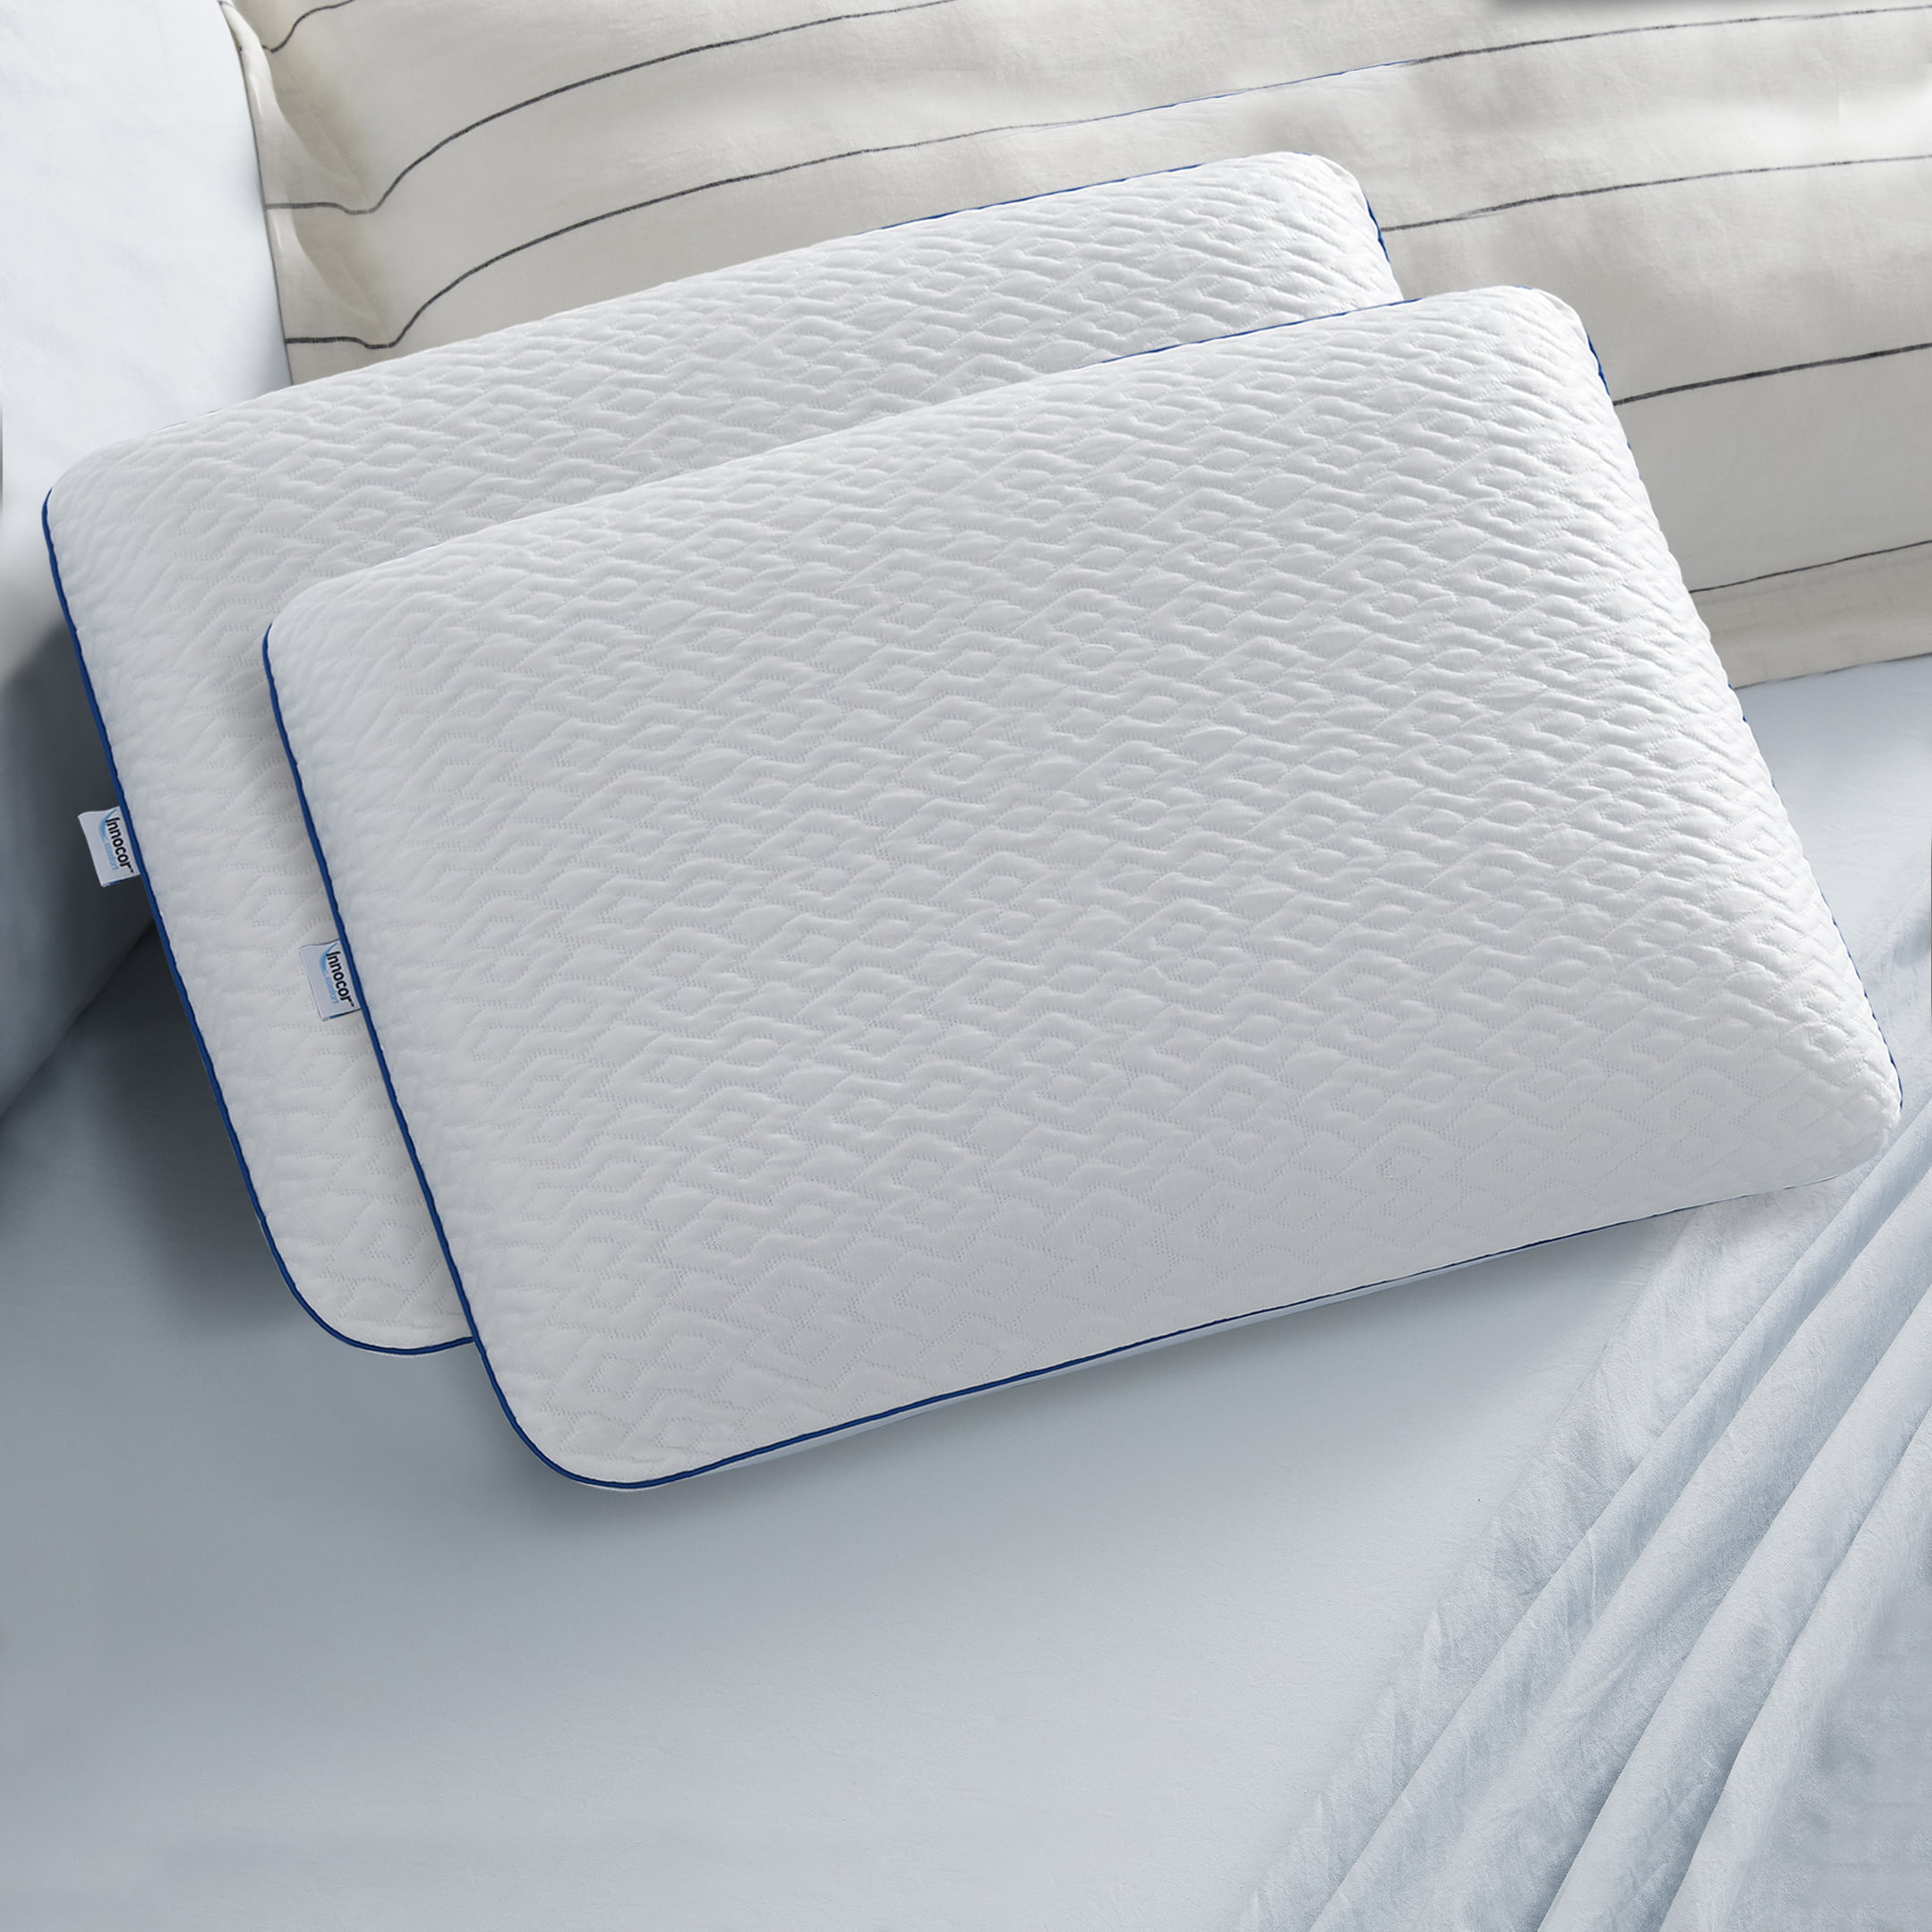 Sleep Innovations Forever Cool Gel Memory Foam Standard Pillow With Cooling Cover 2 Pack